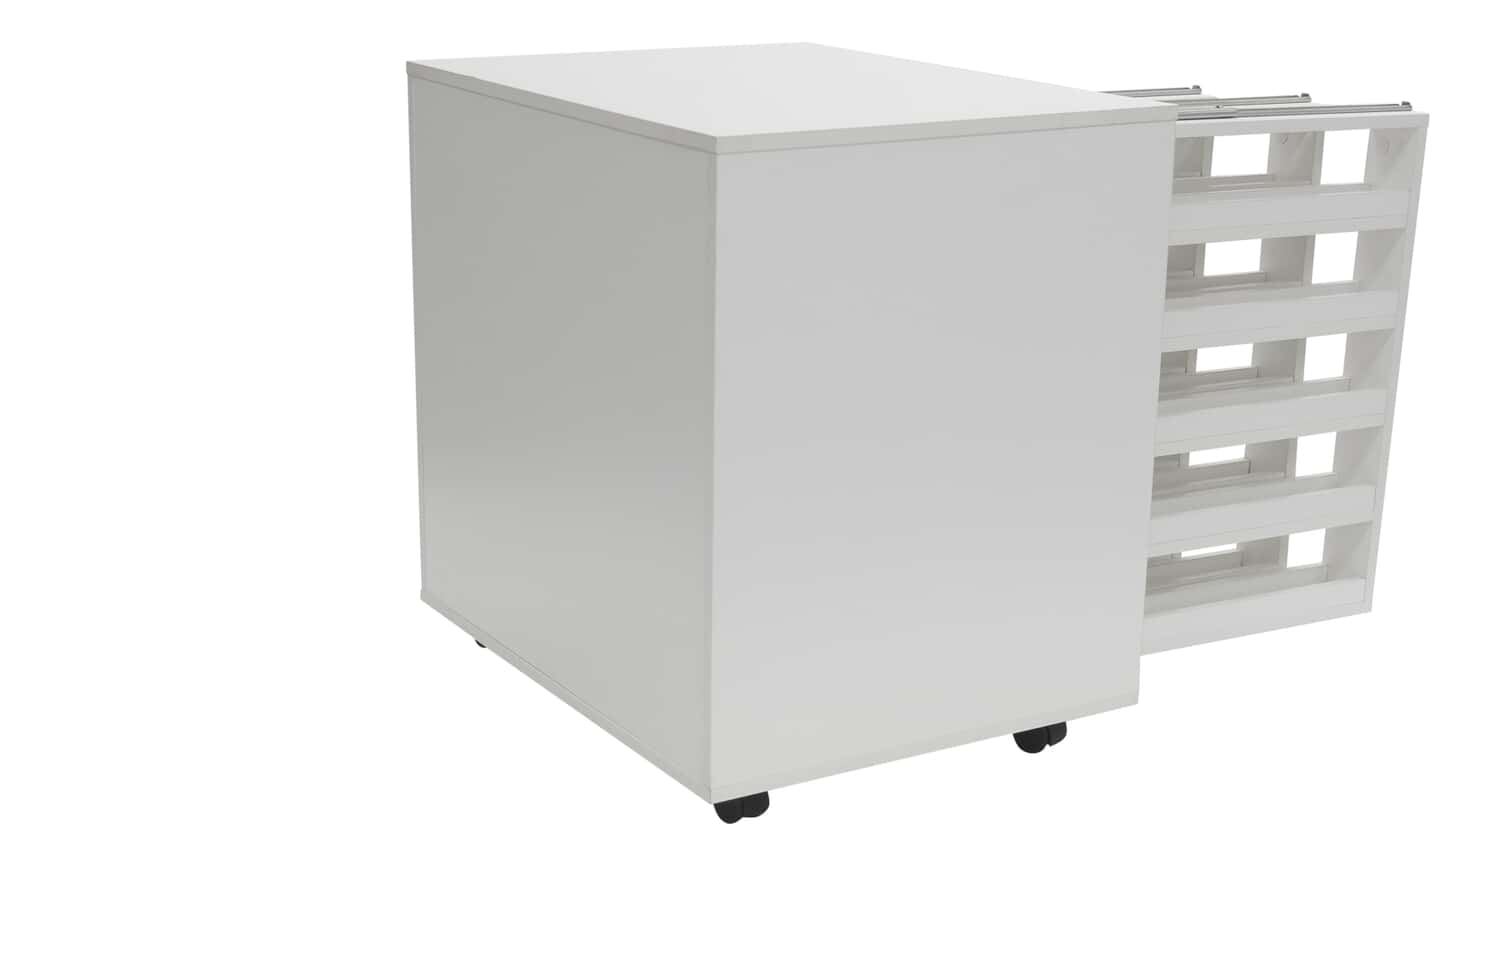 Arrow 2011 Mod Squad Modular Sewing, Cutting, Quilting, Crafting Cabinet,  Portable with Wheels and Airlift, White Finish